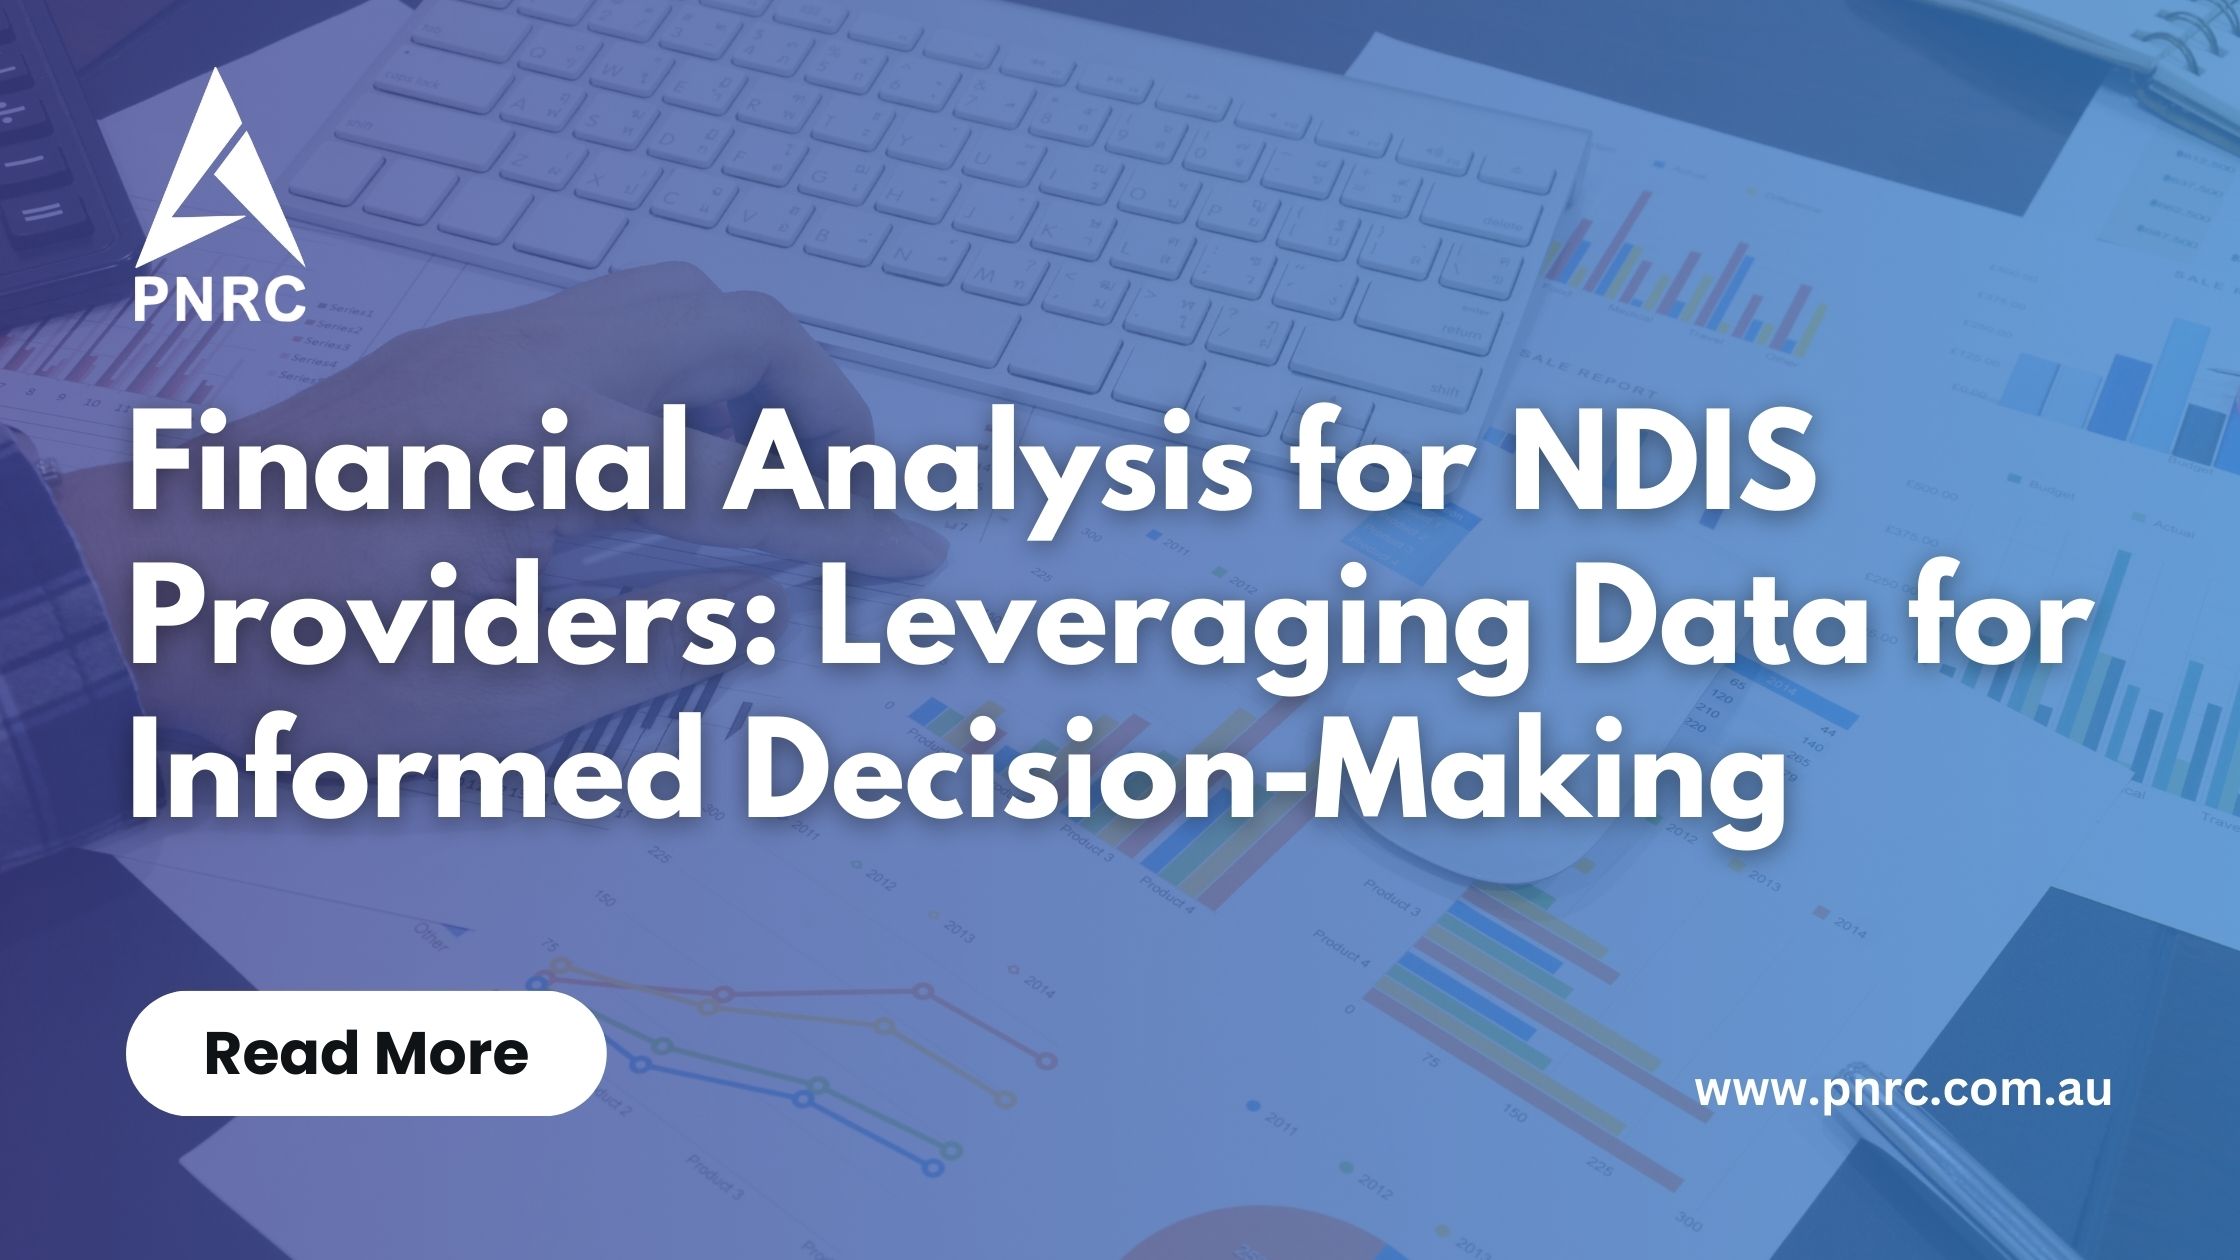 Financial Analysis for NDIS Providers: Leveraging Data for Informed Decision-Making